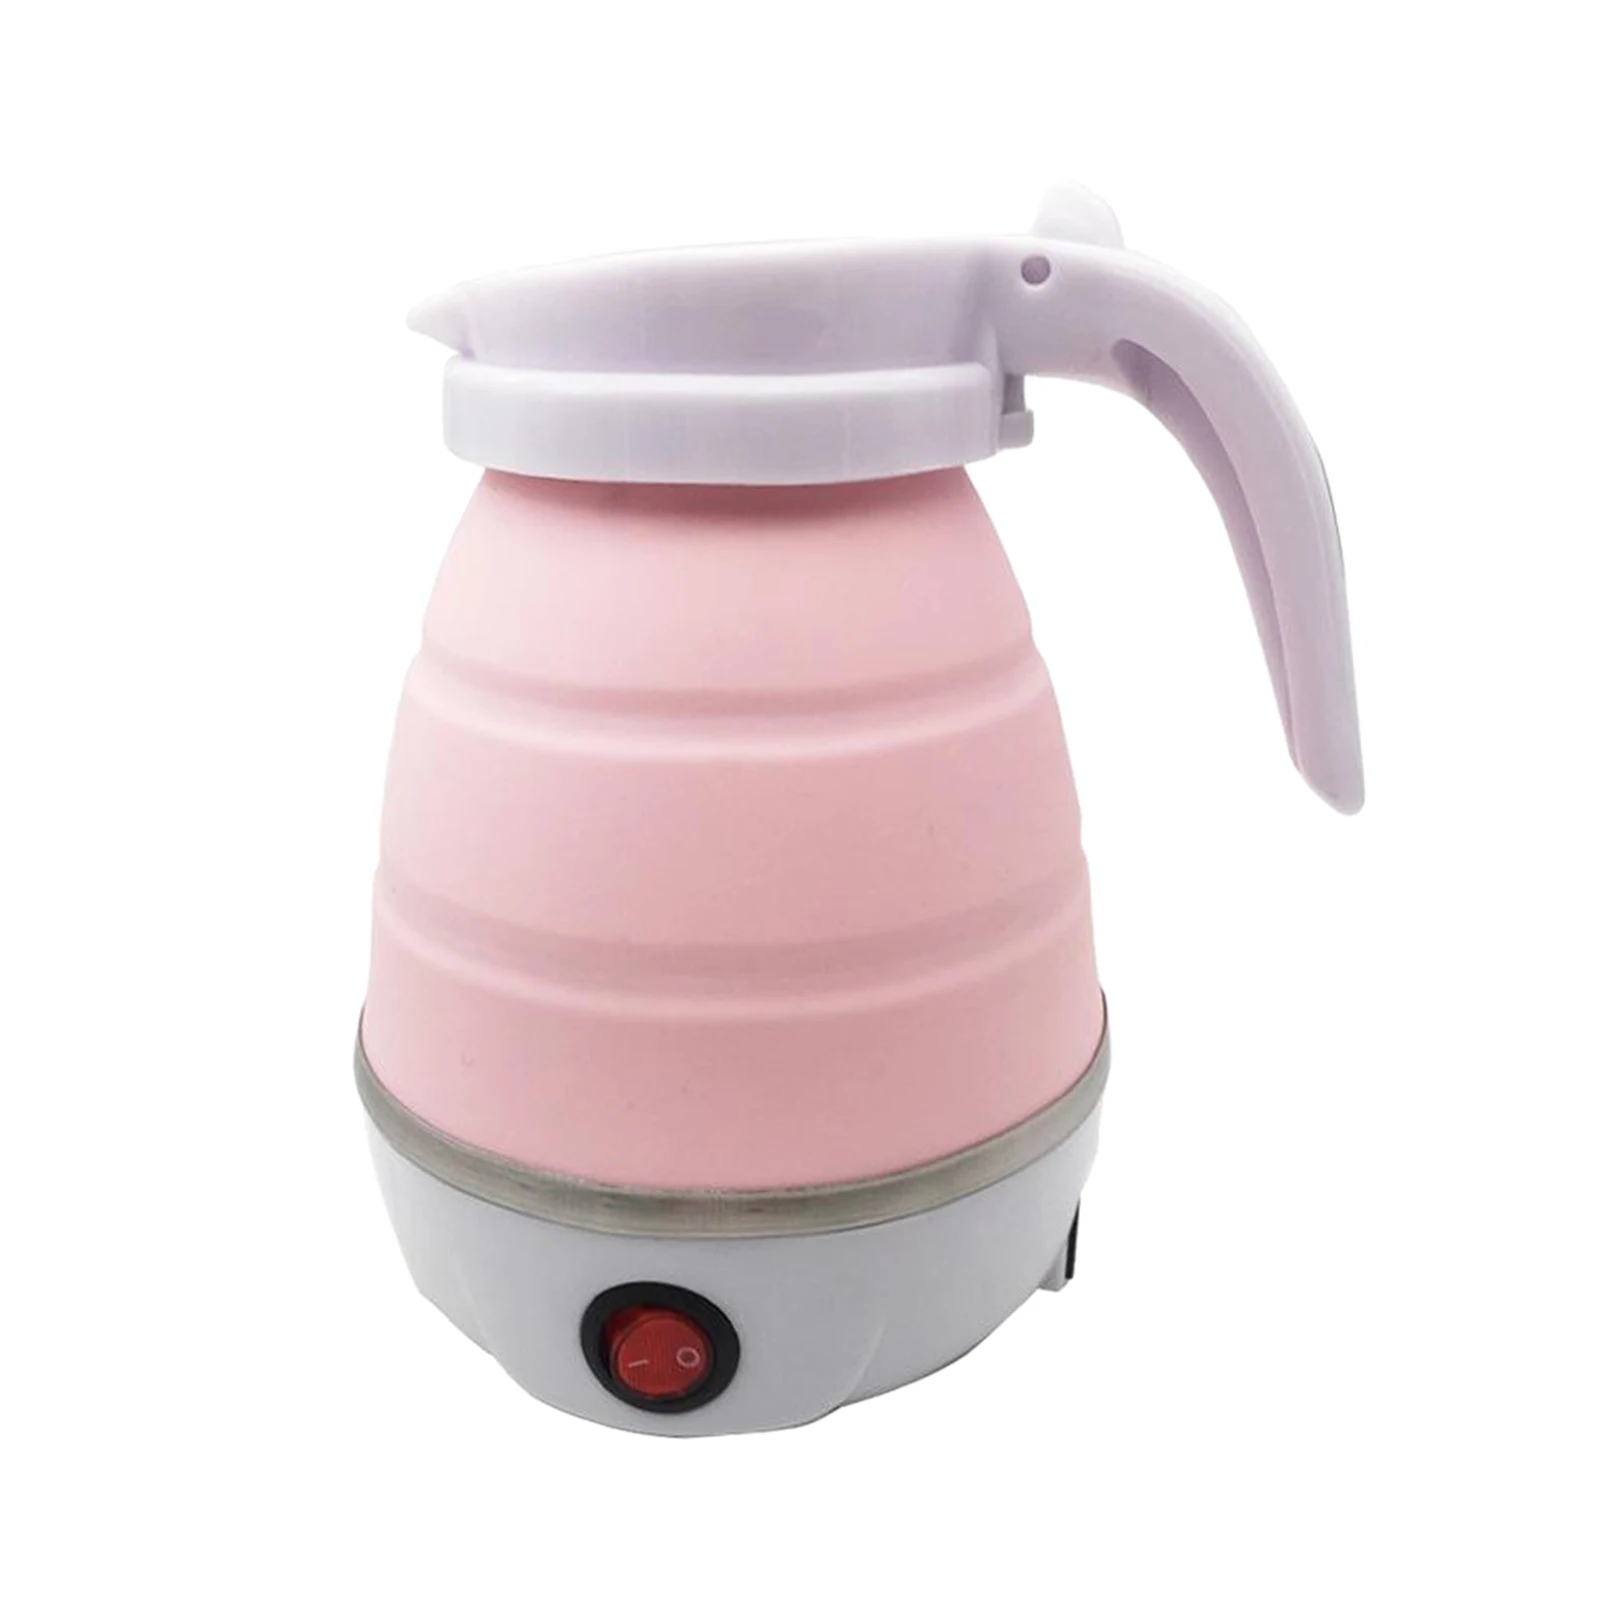 Home Electric Kettle Durable Silicone Foldable Portable Travel Camping Water Boiler Electric Appliances EU Plug